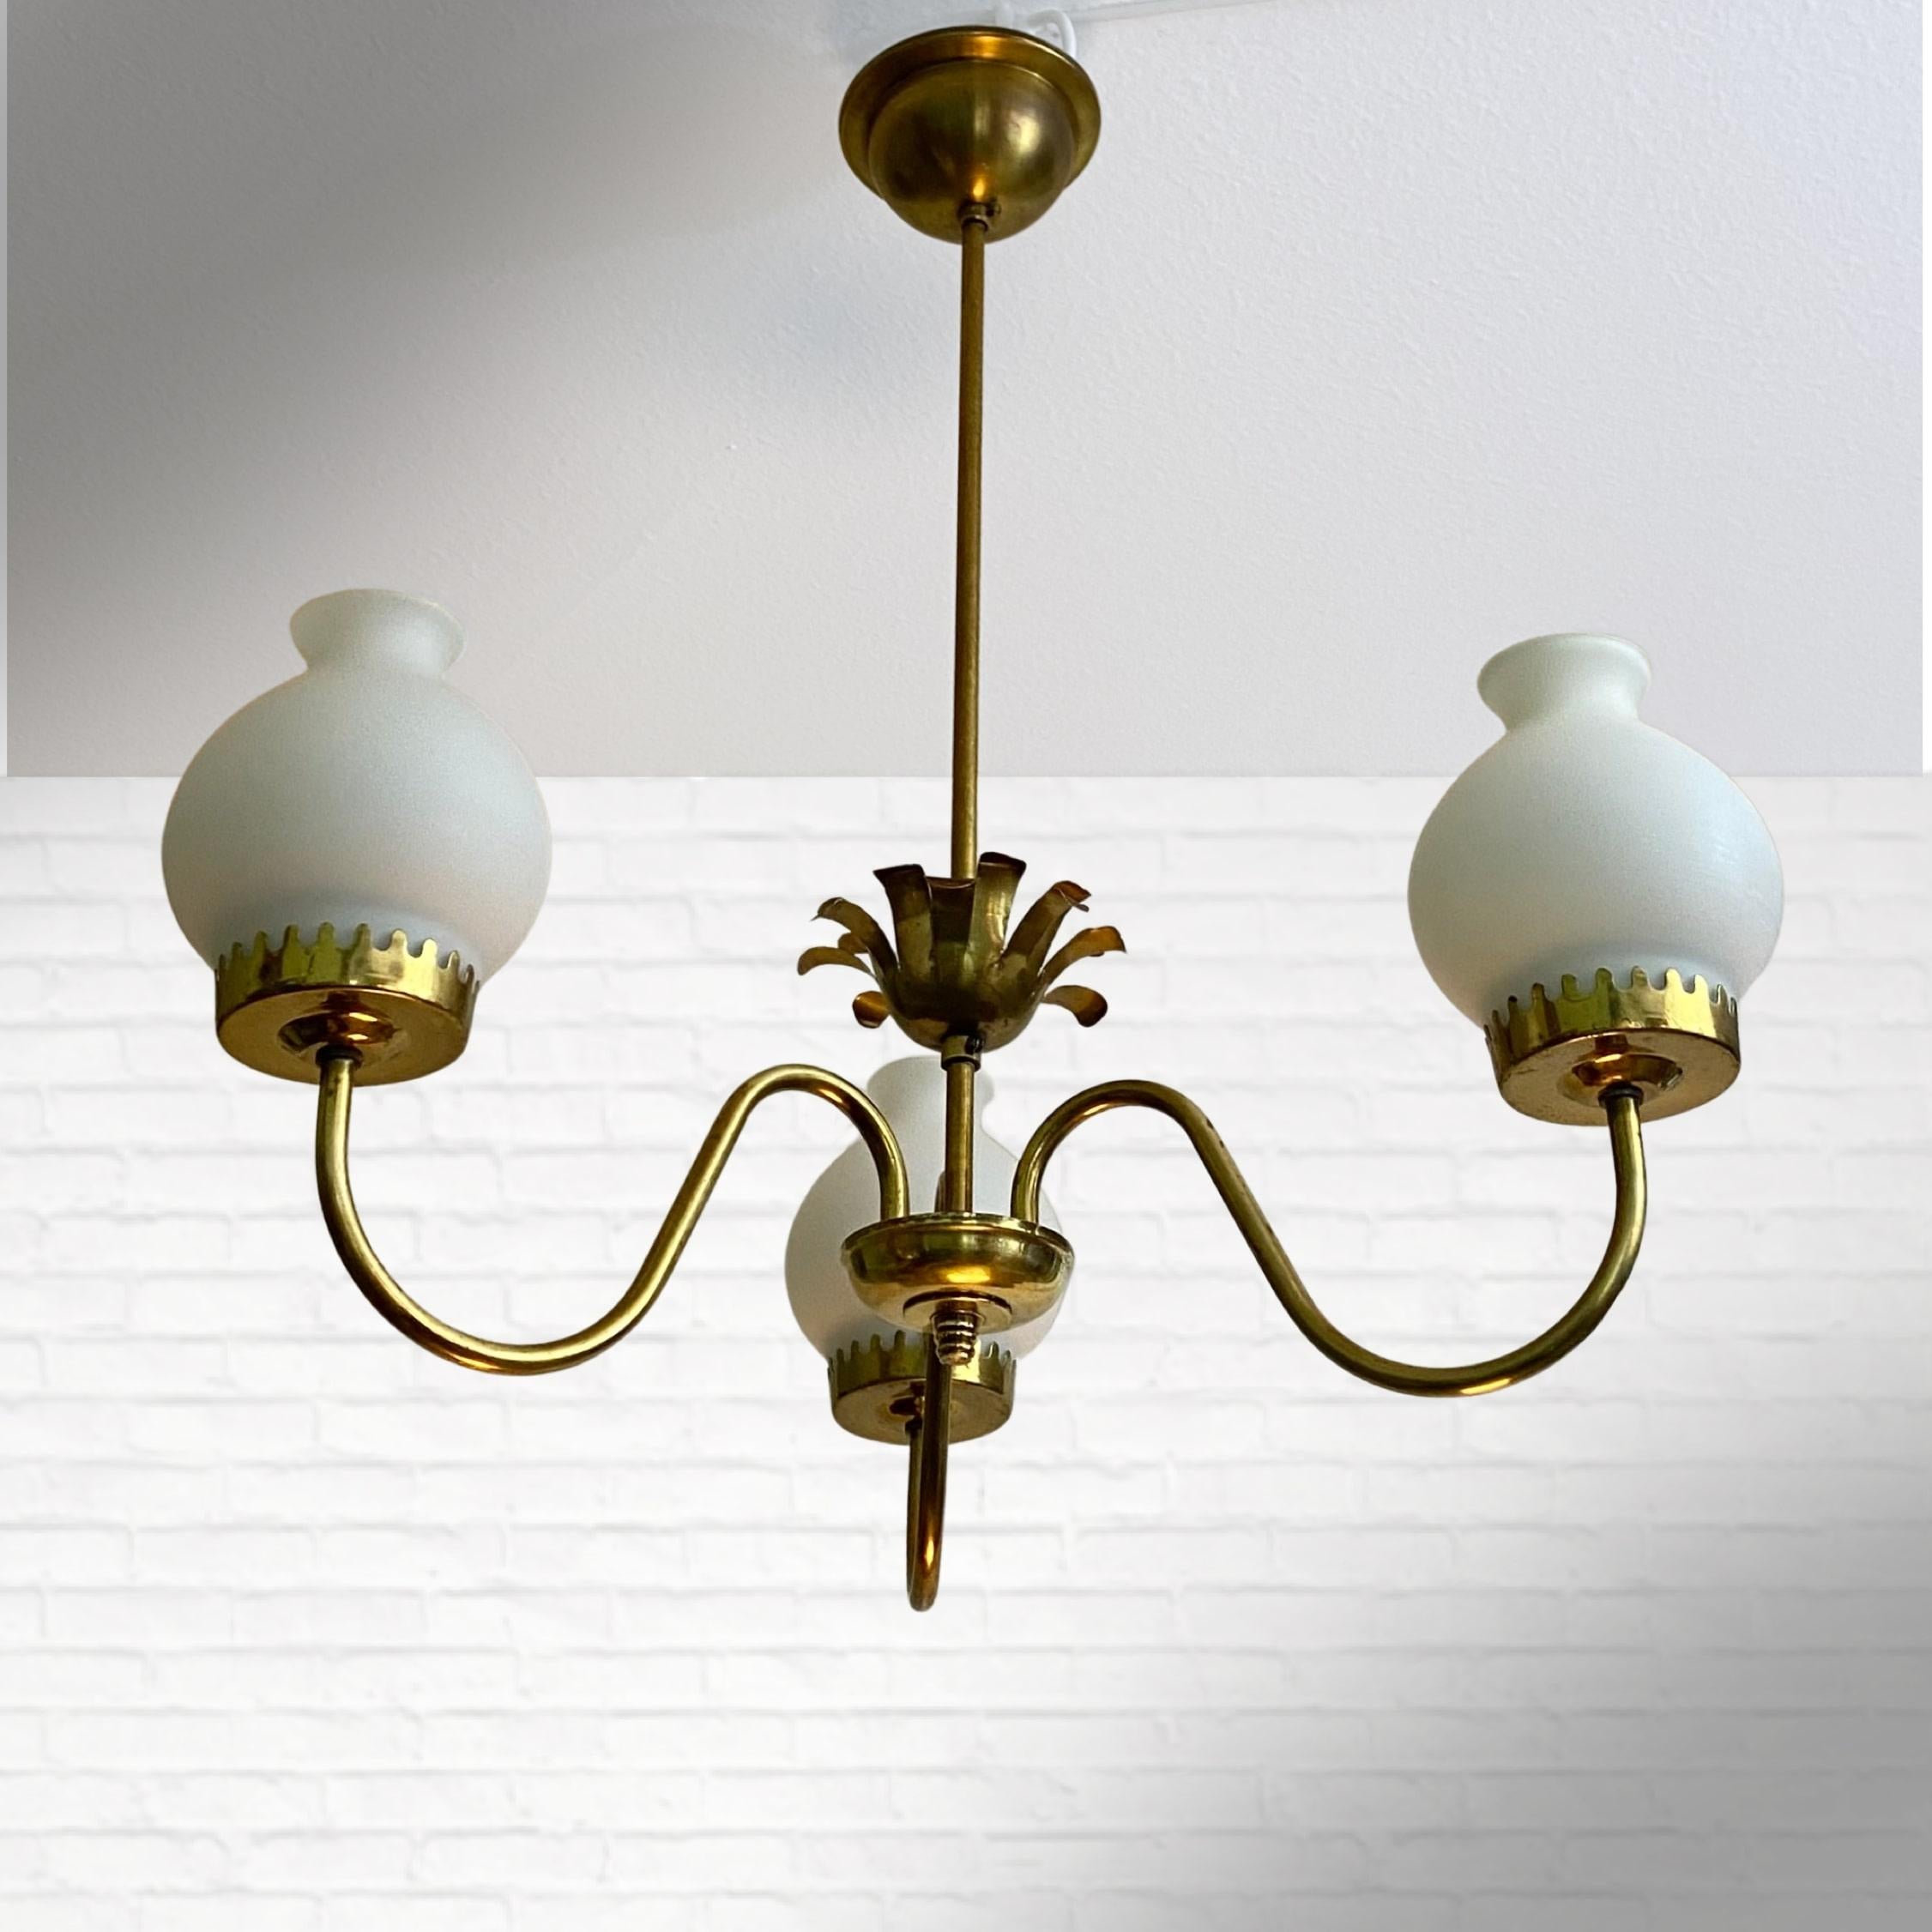 Swedish 1940s chandelier made from brass with three curved arms holding bell-shaped shades in opal glass. The centered flower-shaped decoration brings some extra elegance to this graceful fixture. With its minimalistic shape and clean lines, this